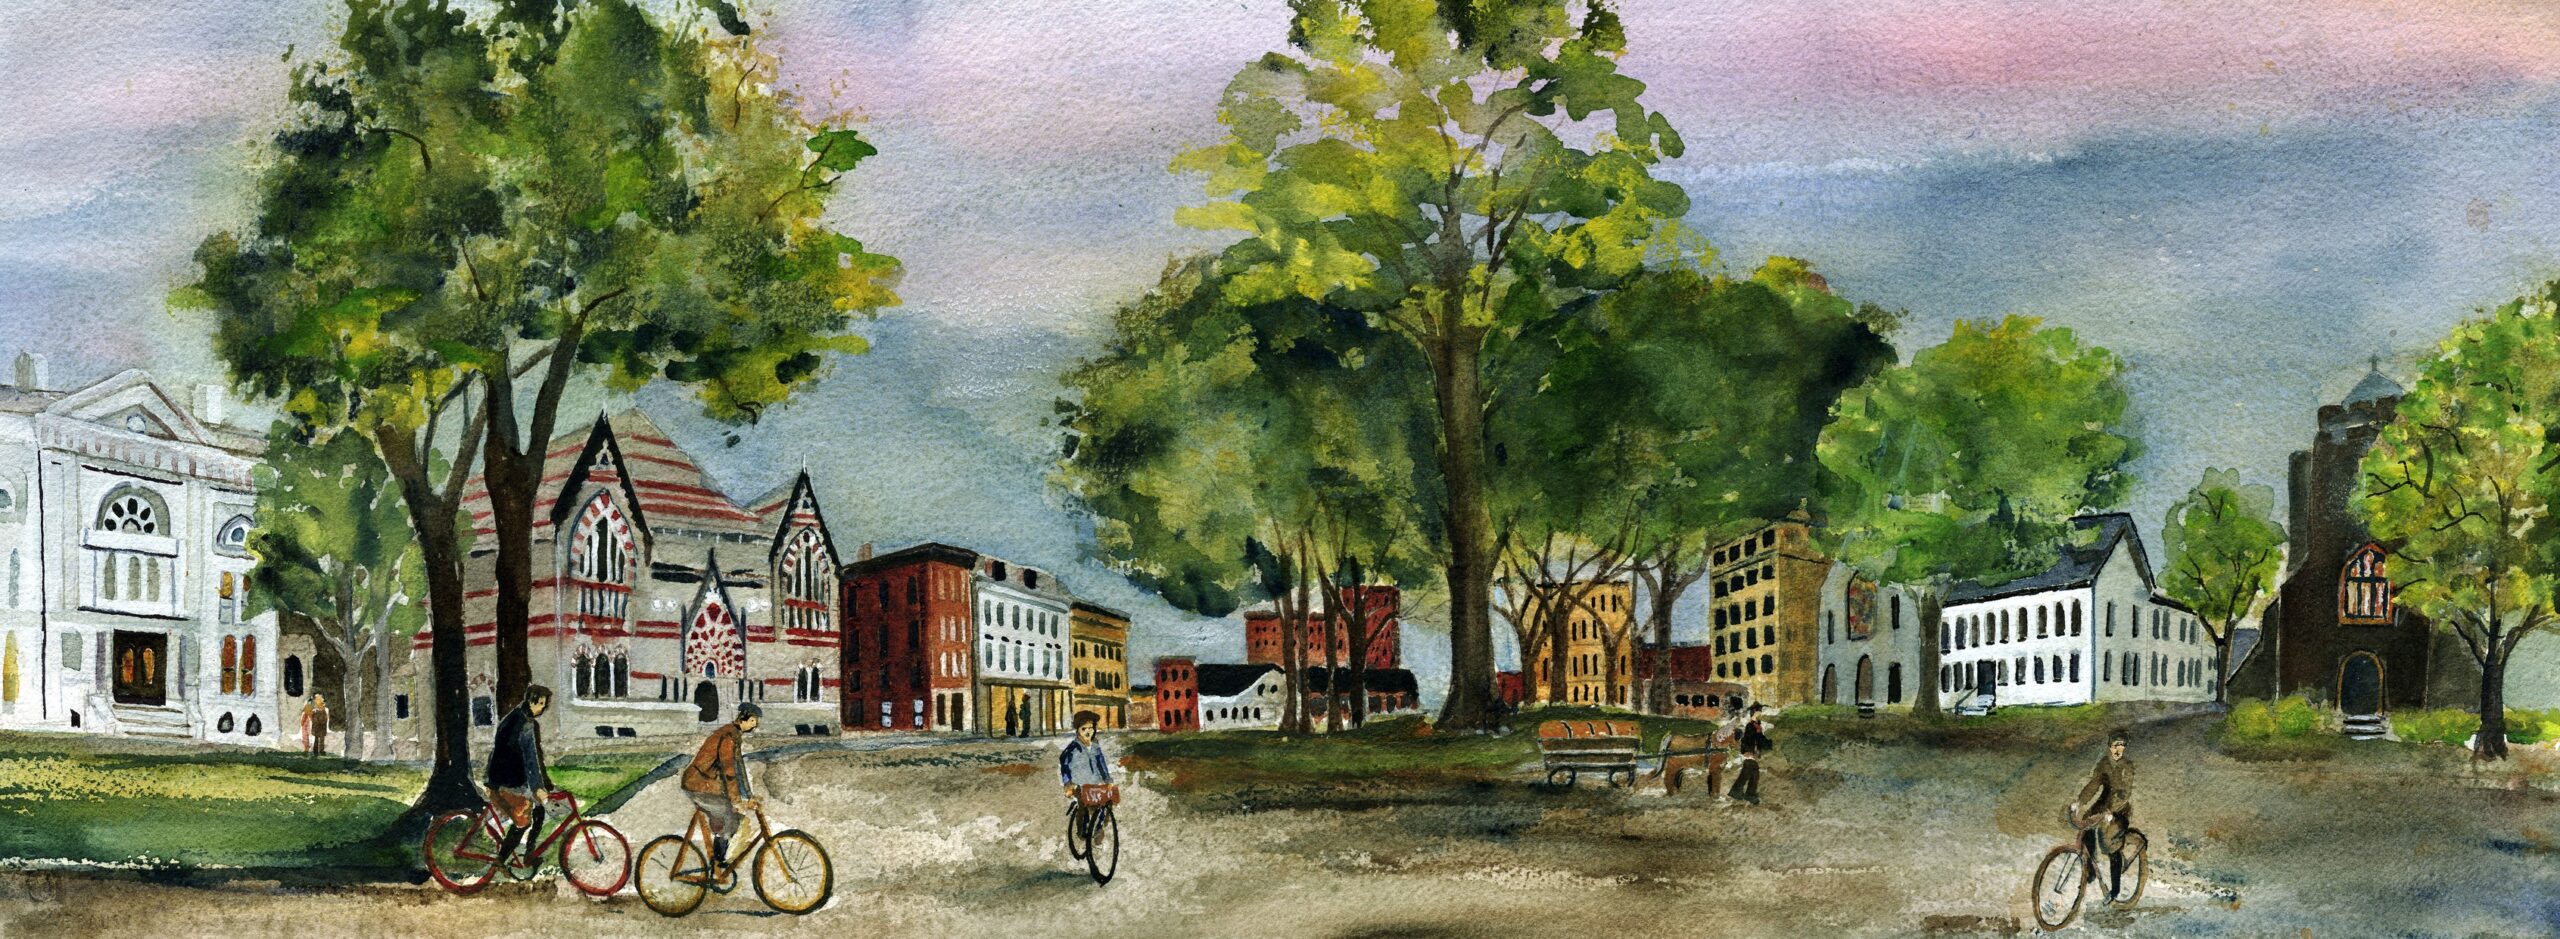 CYCLE THERAPY - watercolor on the move by Marguerite Bride